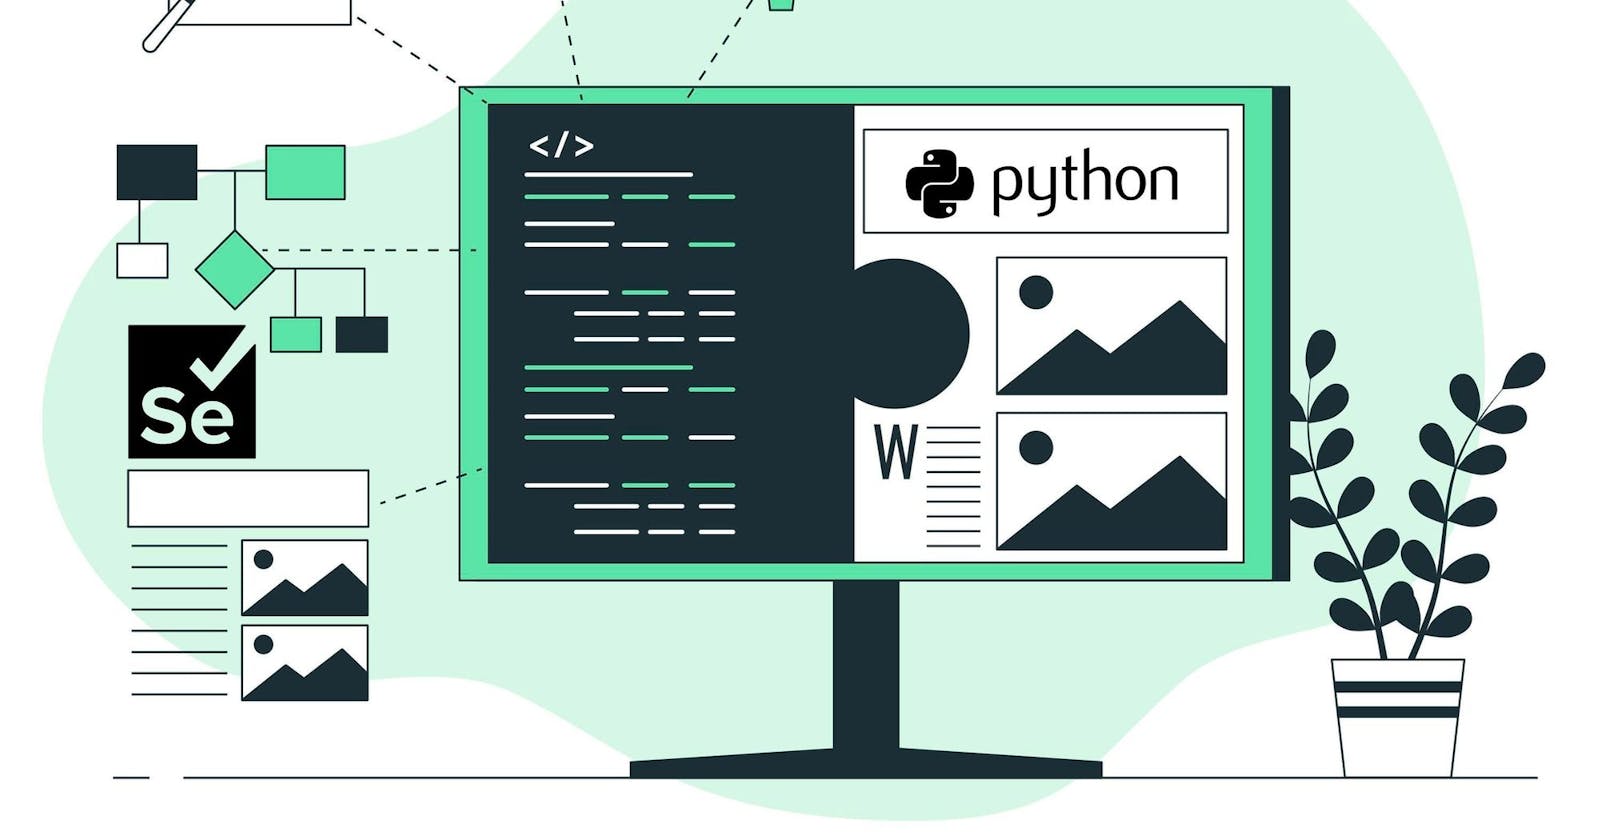 Web scraping with Selenium and Python